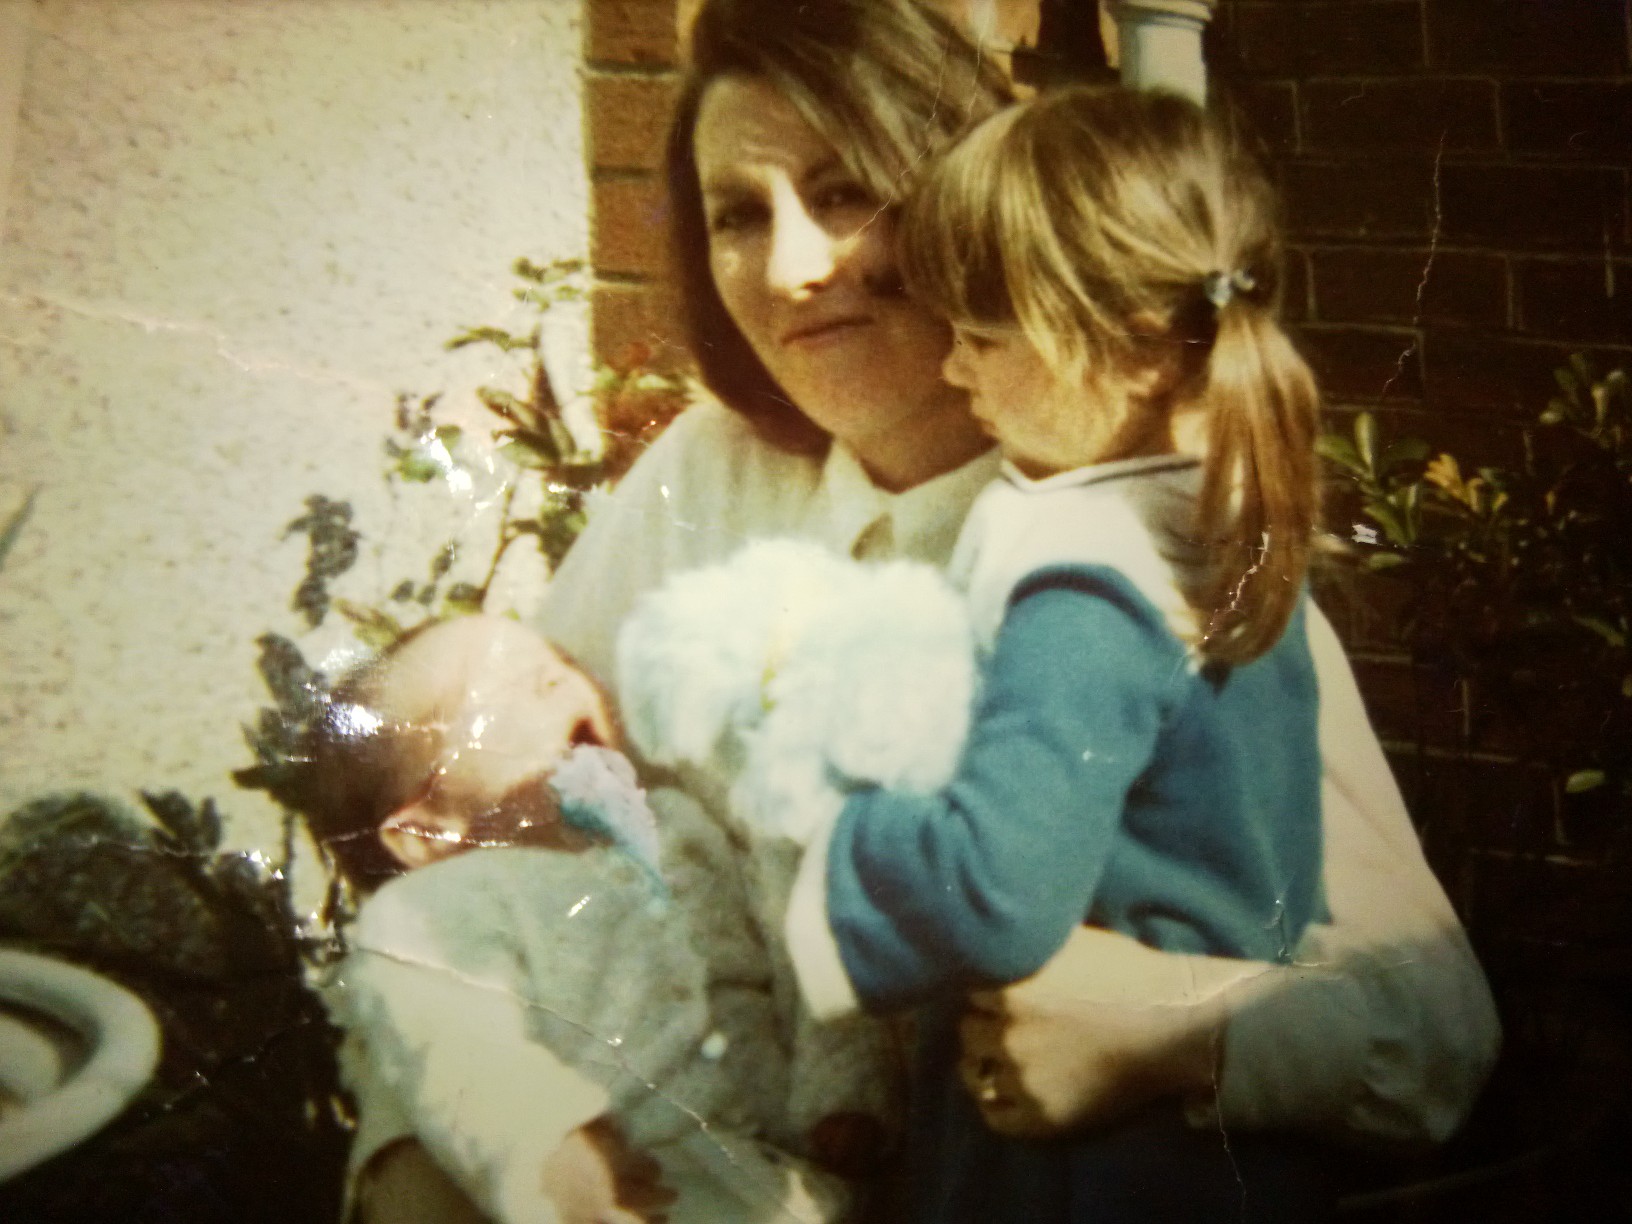 Rachel and her mother shortly after her baby brother was born